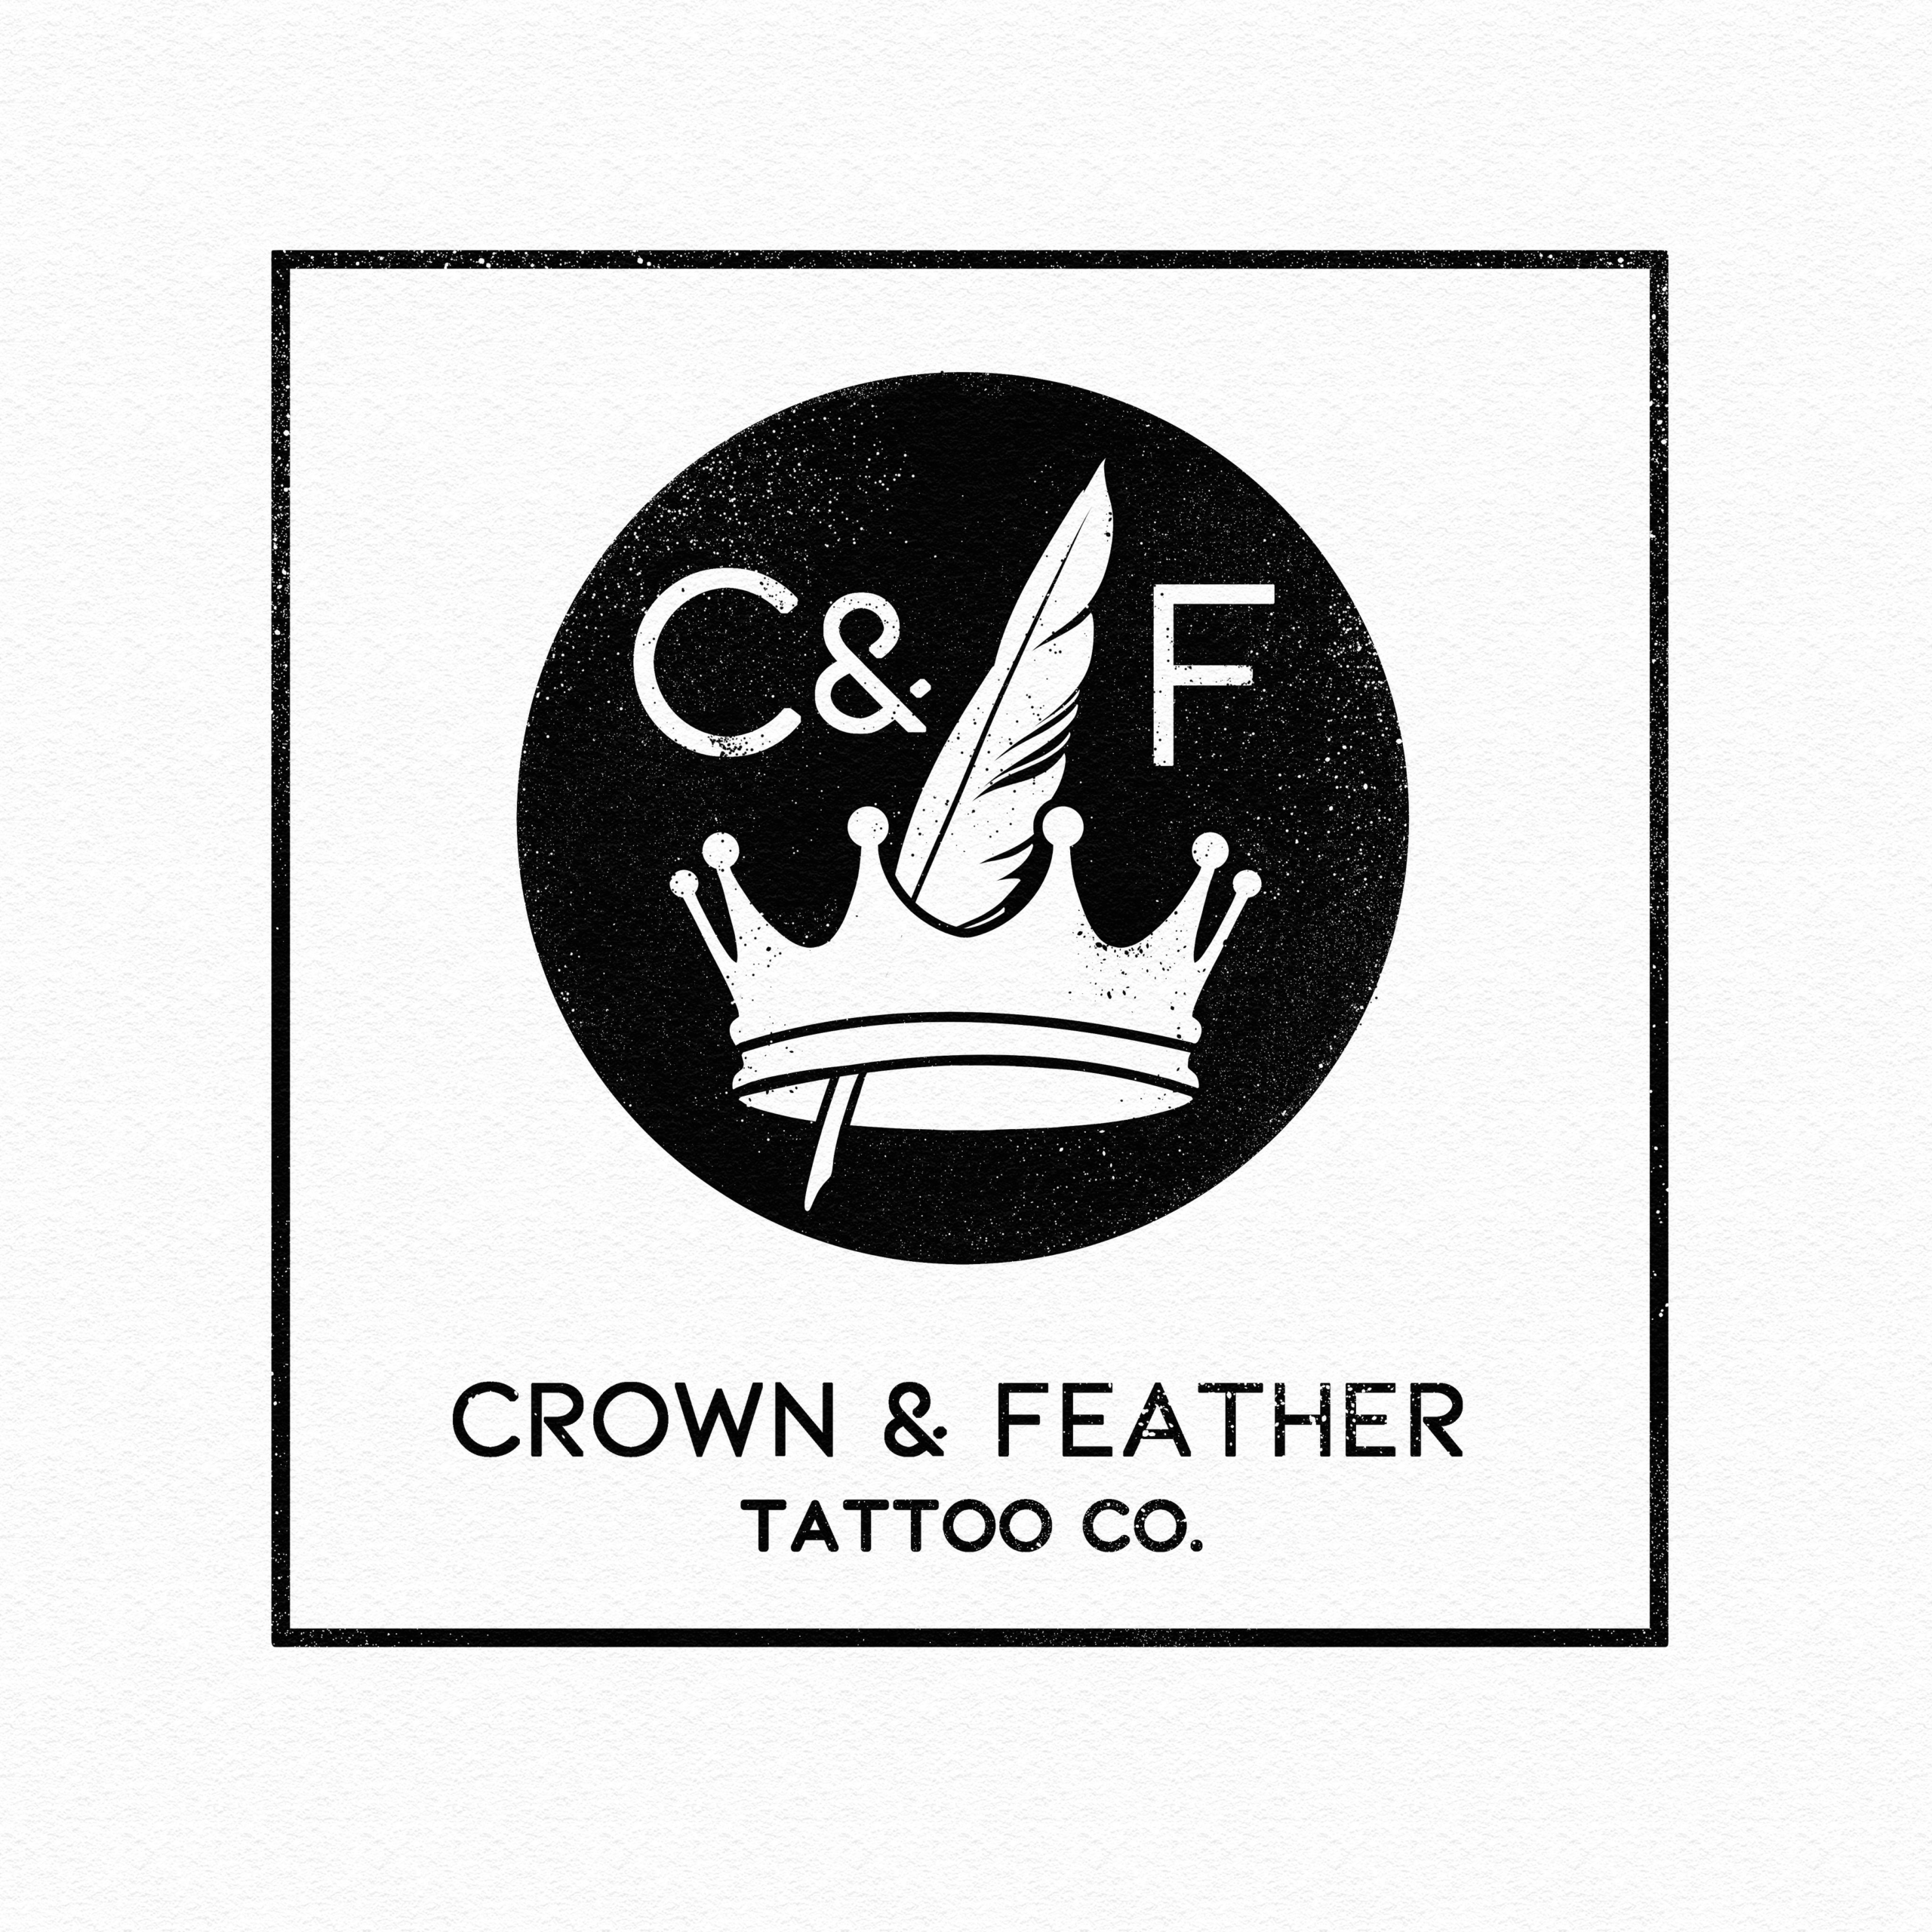 Crown and Feather tattoo co.